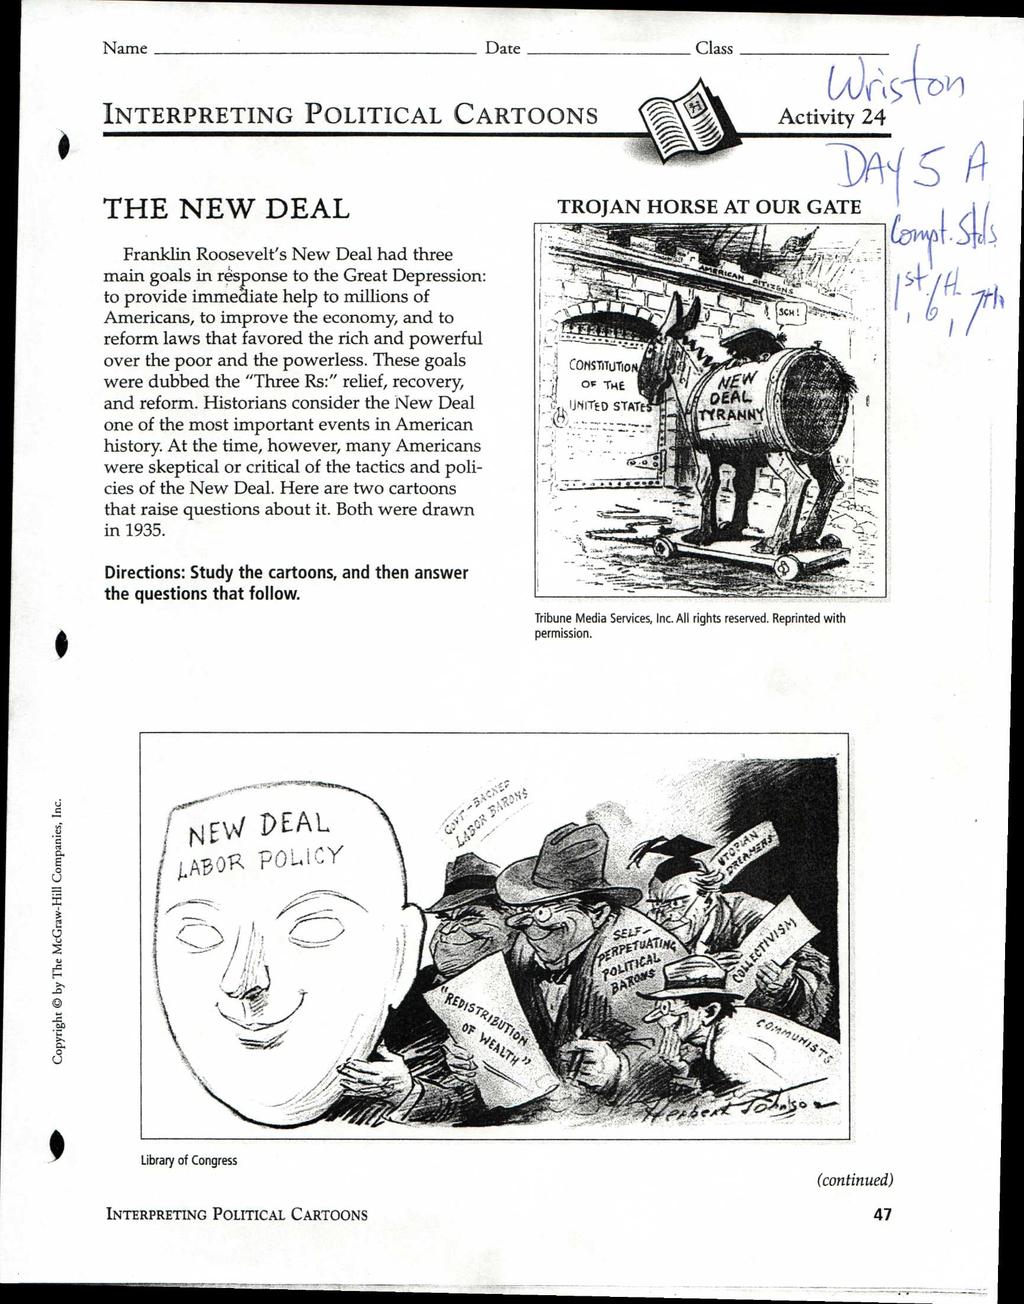 Name Date Class INTERPRETING POLITICAL CARTOONS (A) Activity 24 THE NEW DEAL Franklin Roosevelt's New Deal had three main goals in response to the Great Depression: to provide immejiate help to